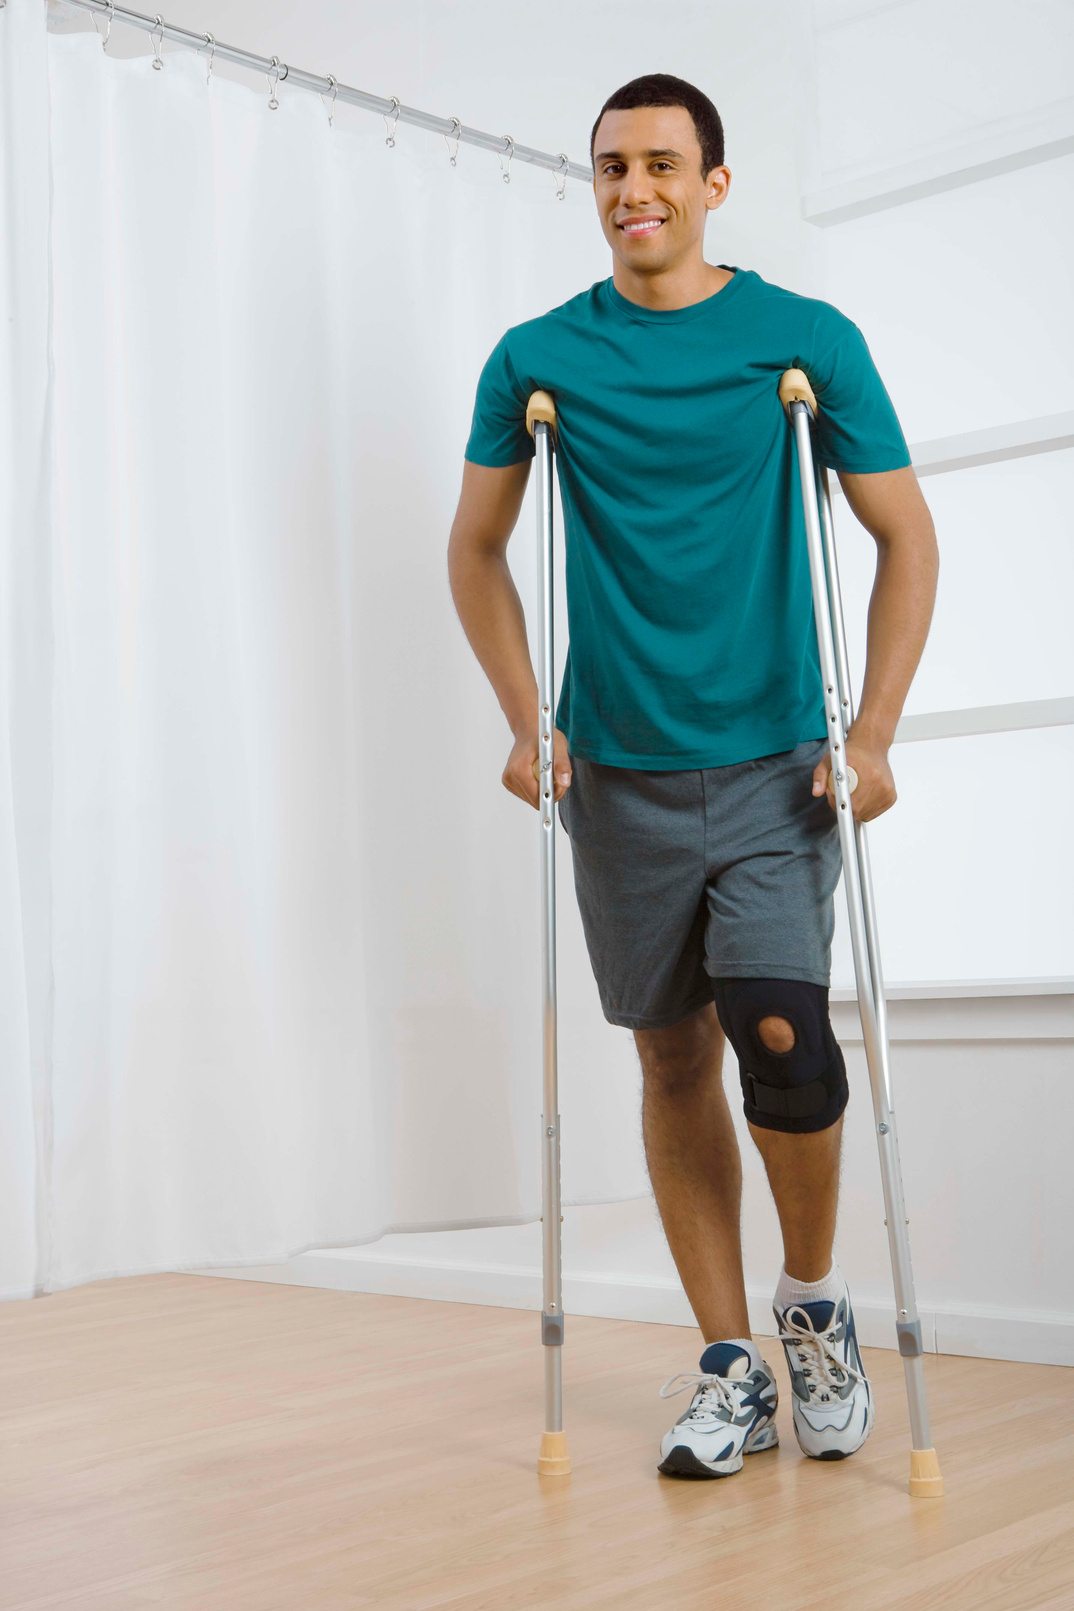 Man with knee brace and crutches